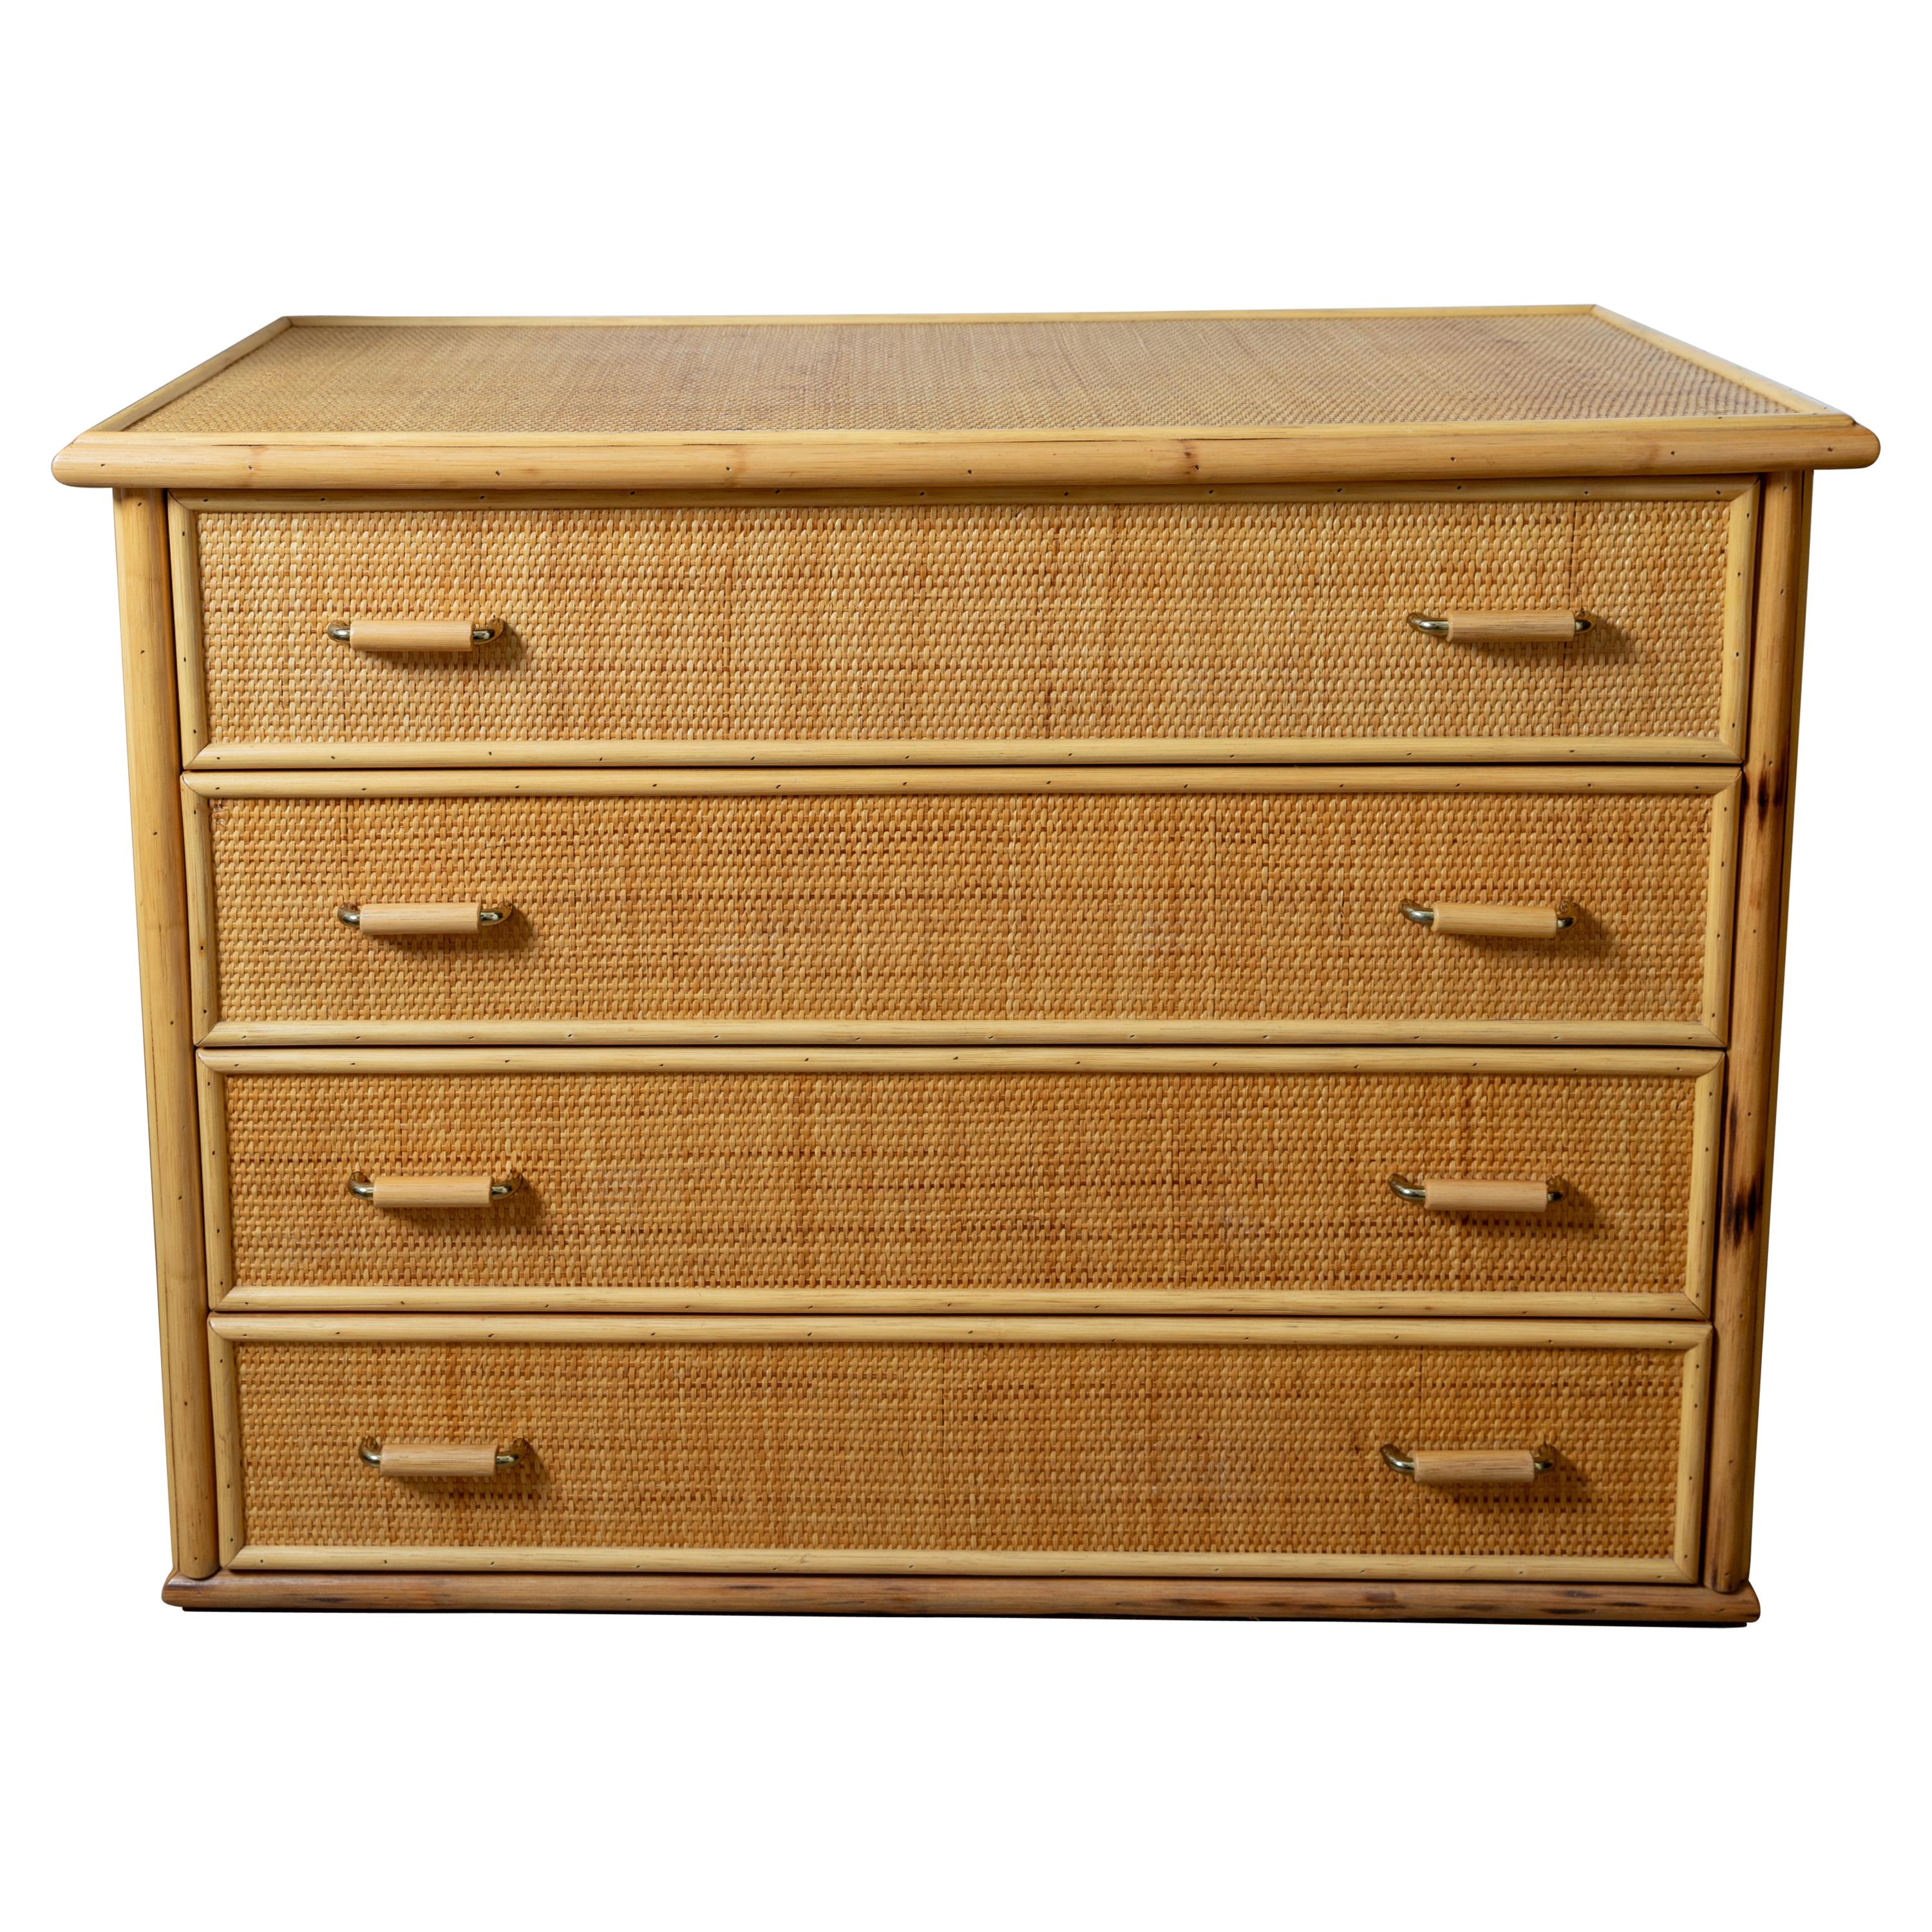 Bamboo Woven Wicker Four-Drawer Chest with Bamboo and Brass Handles